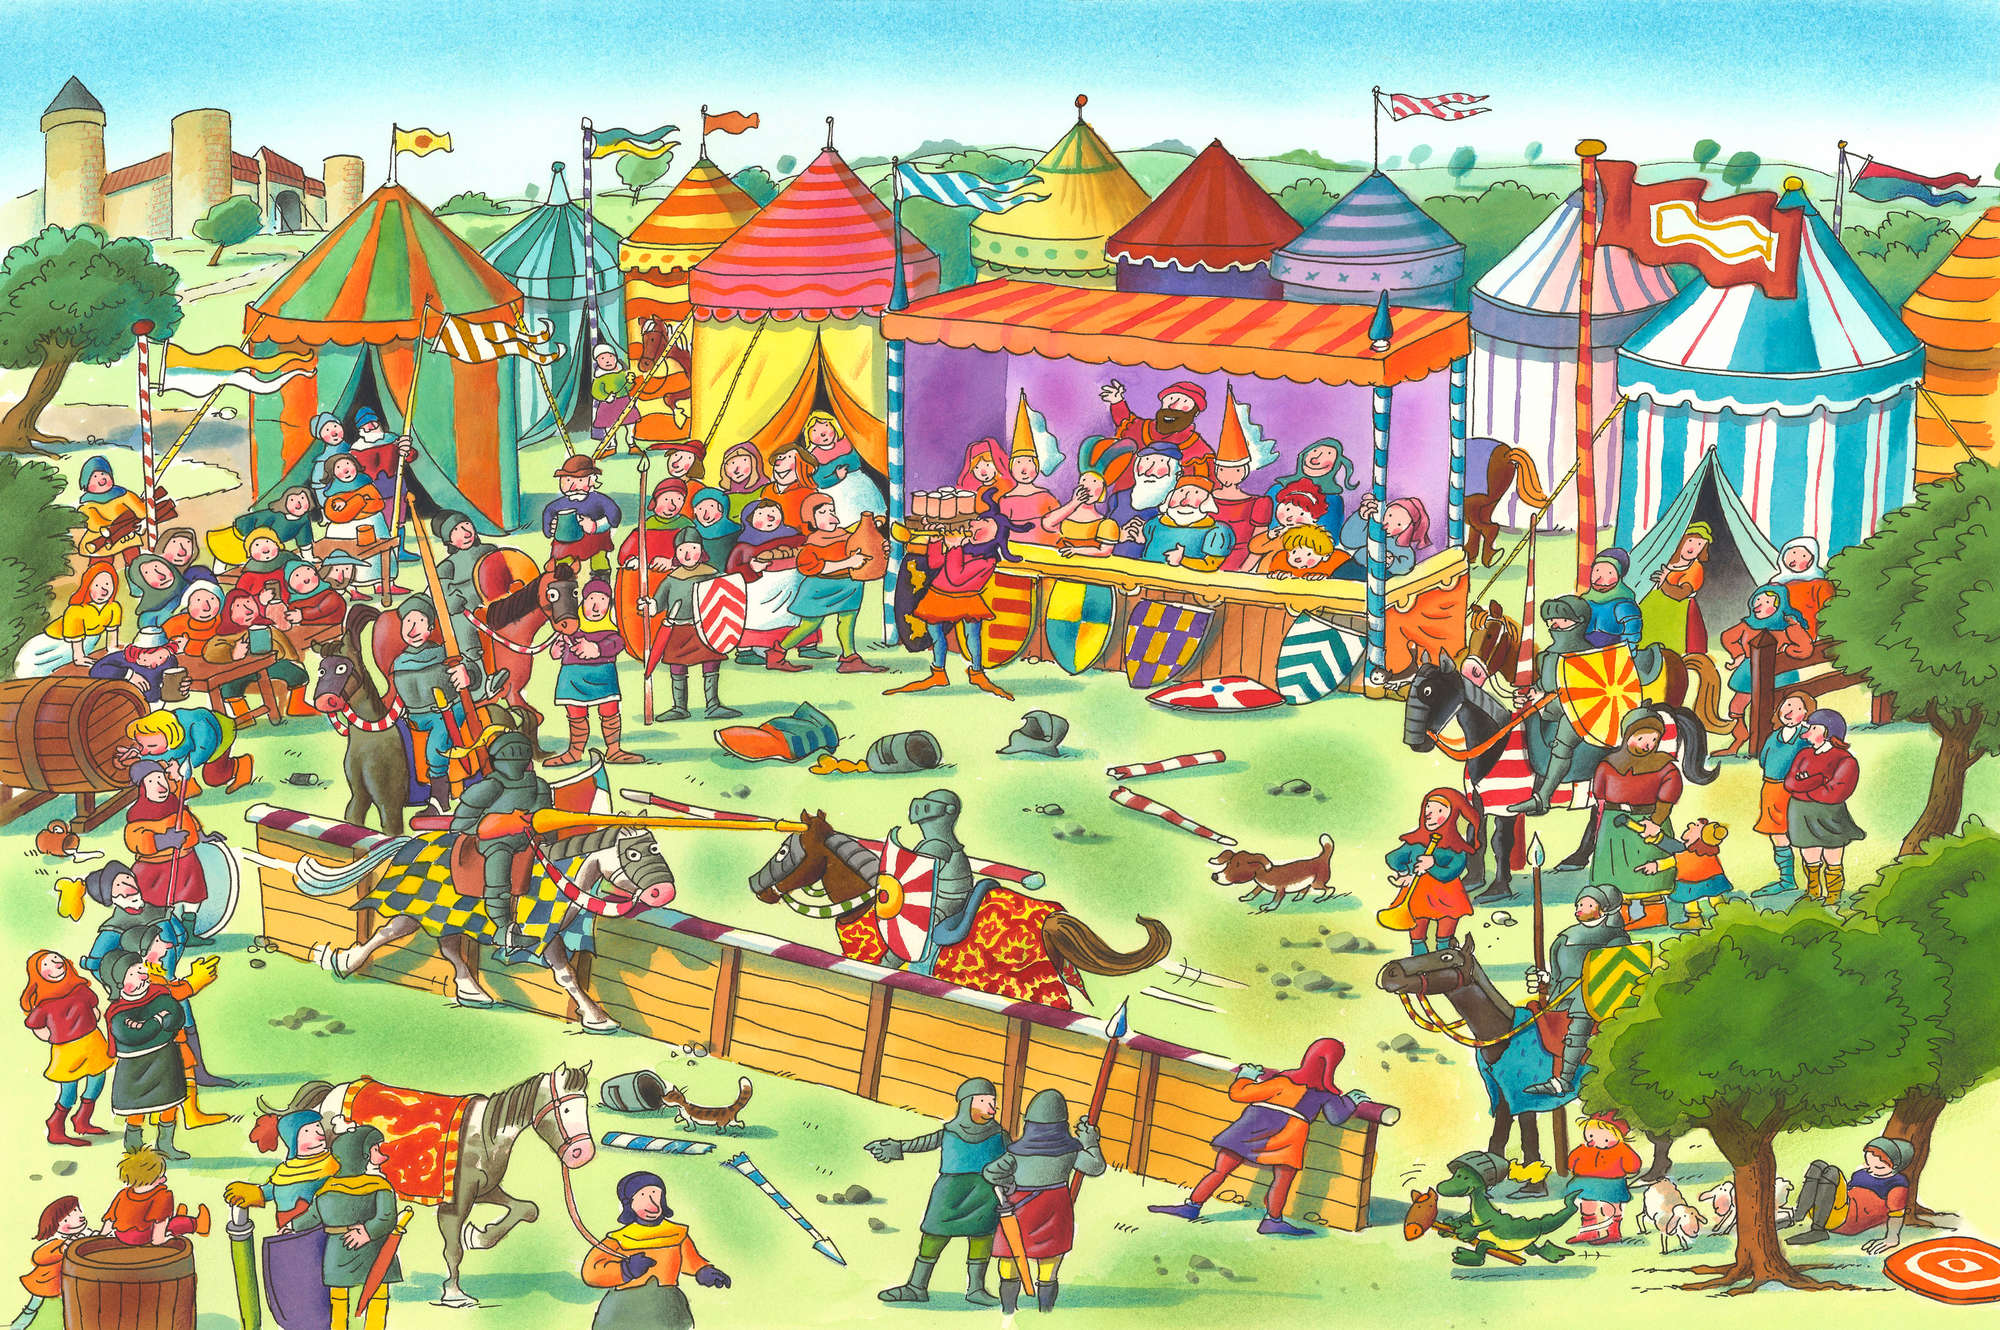             Children mural knight festival with festivals blue and yellow on textured non-woven
        